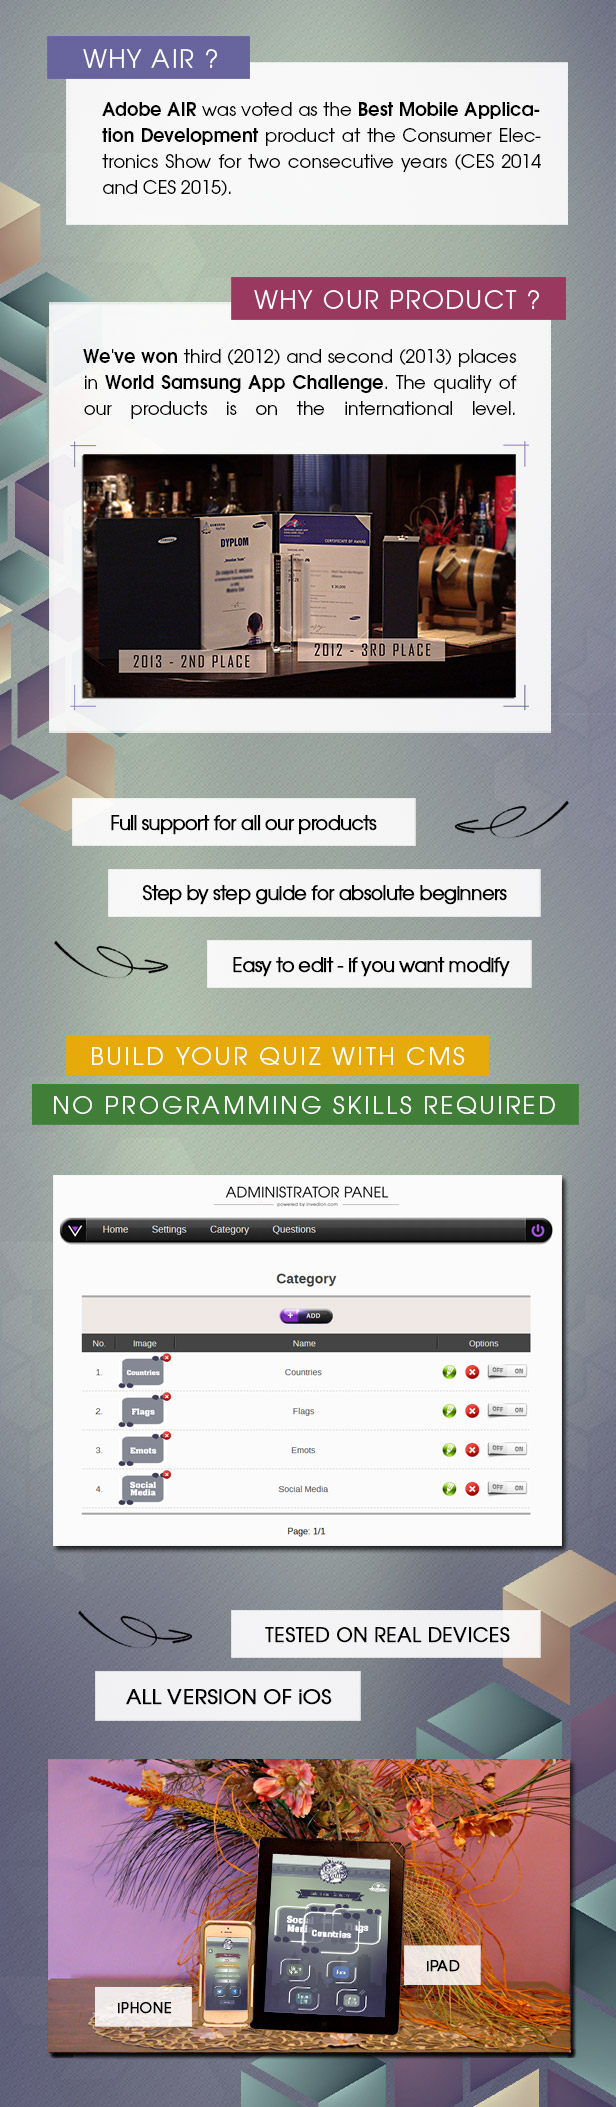 Letter Photo Quiz With CMS & Ads - iOS - 2